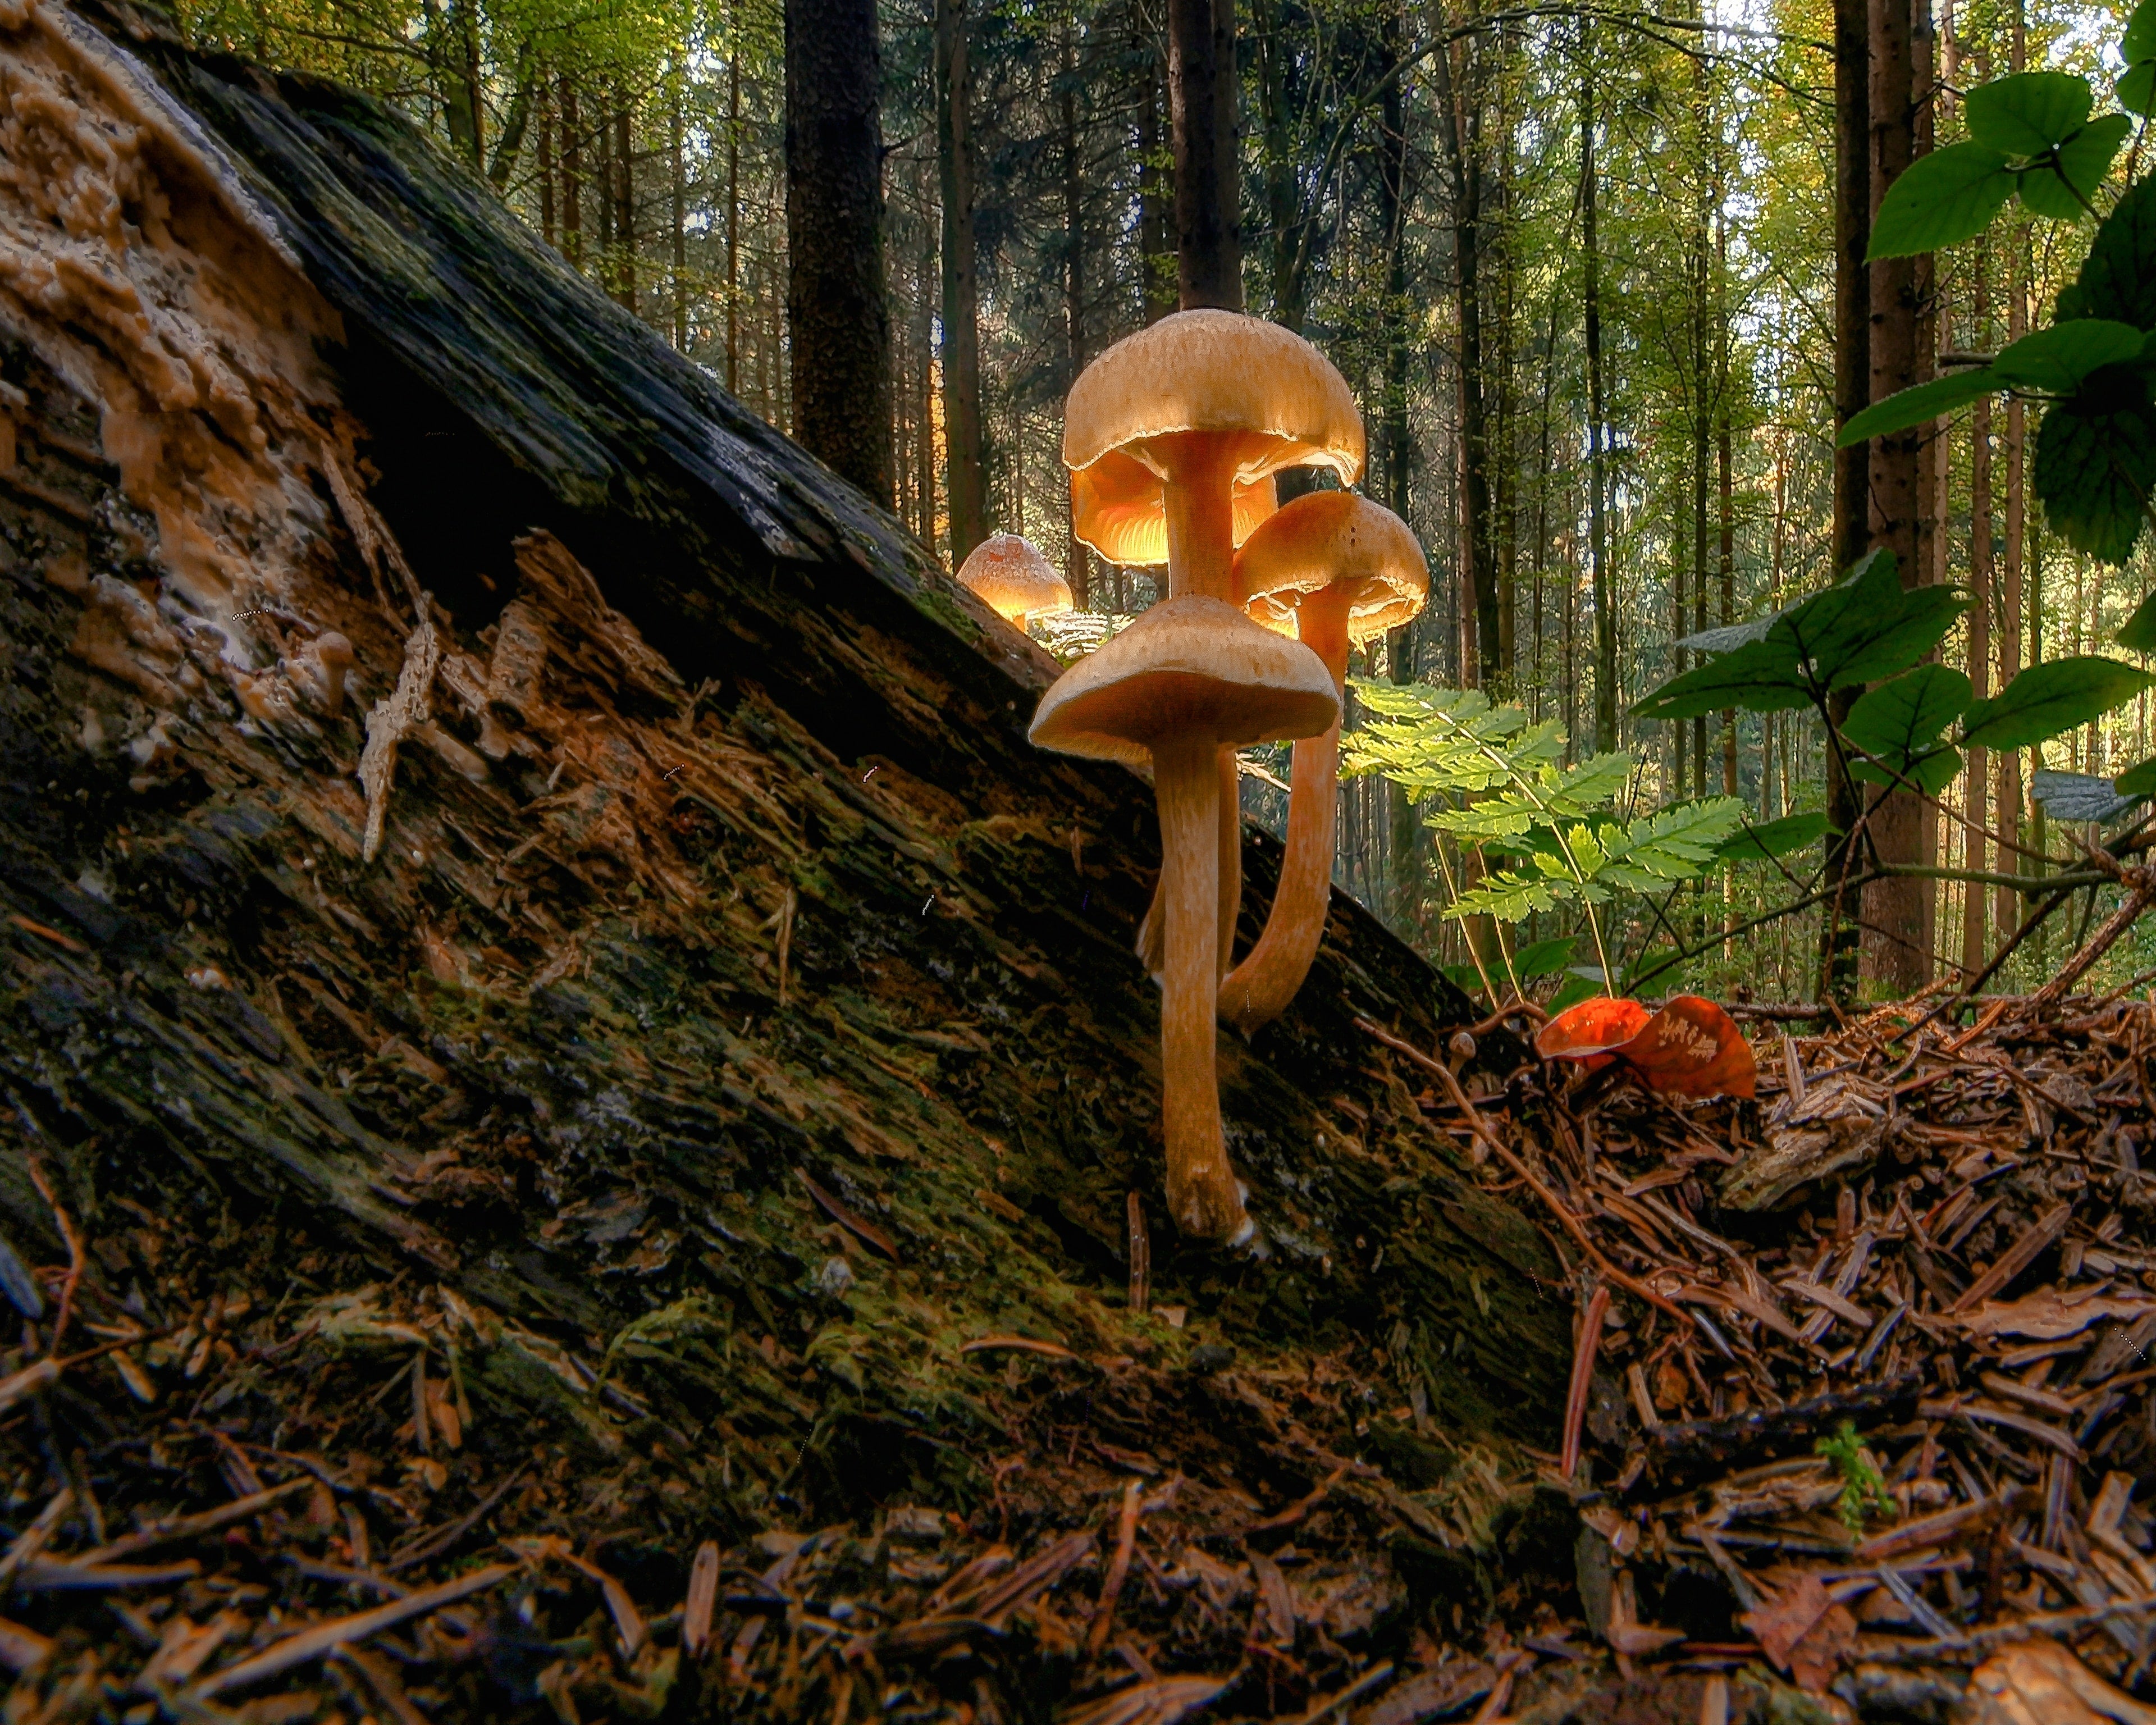 Fungi Life Cycle: From Spores To Fruiting Bodies